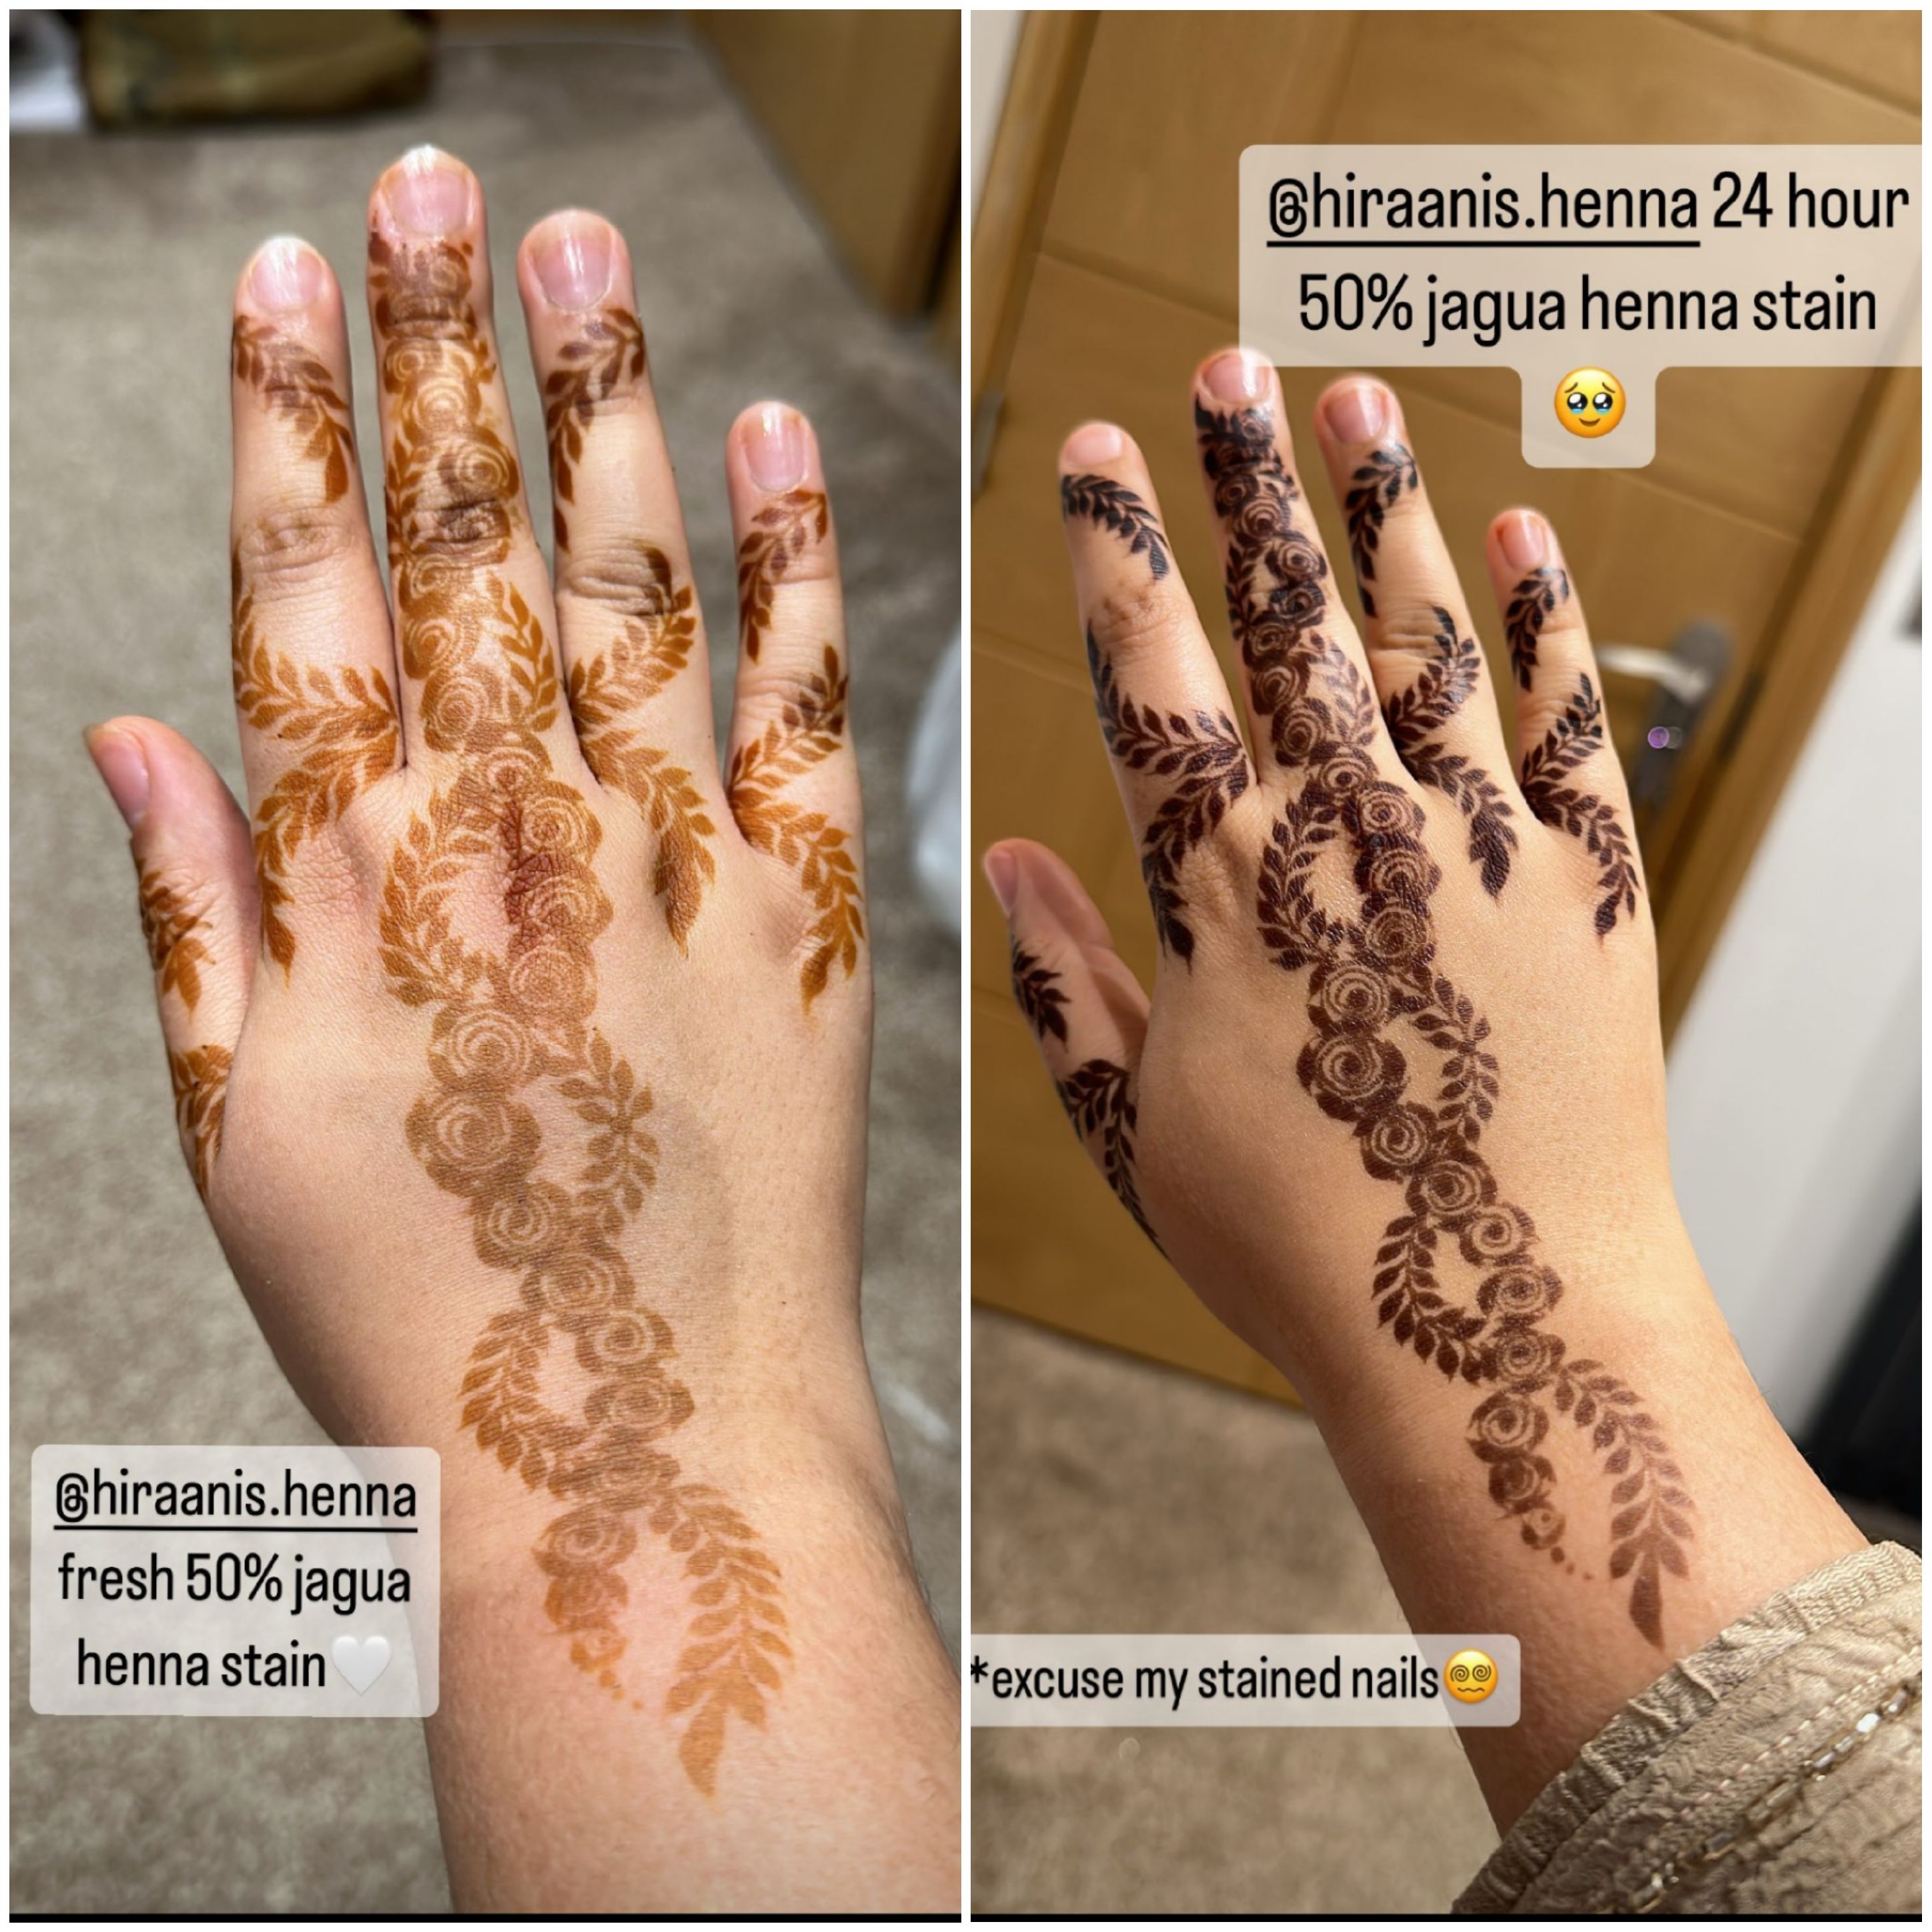 Five steps to take for a darker henna stain